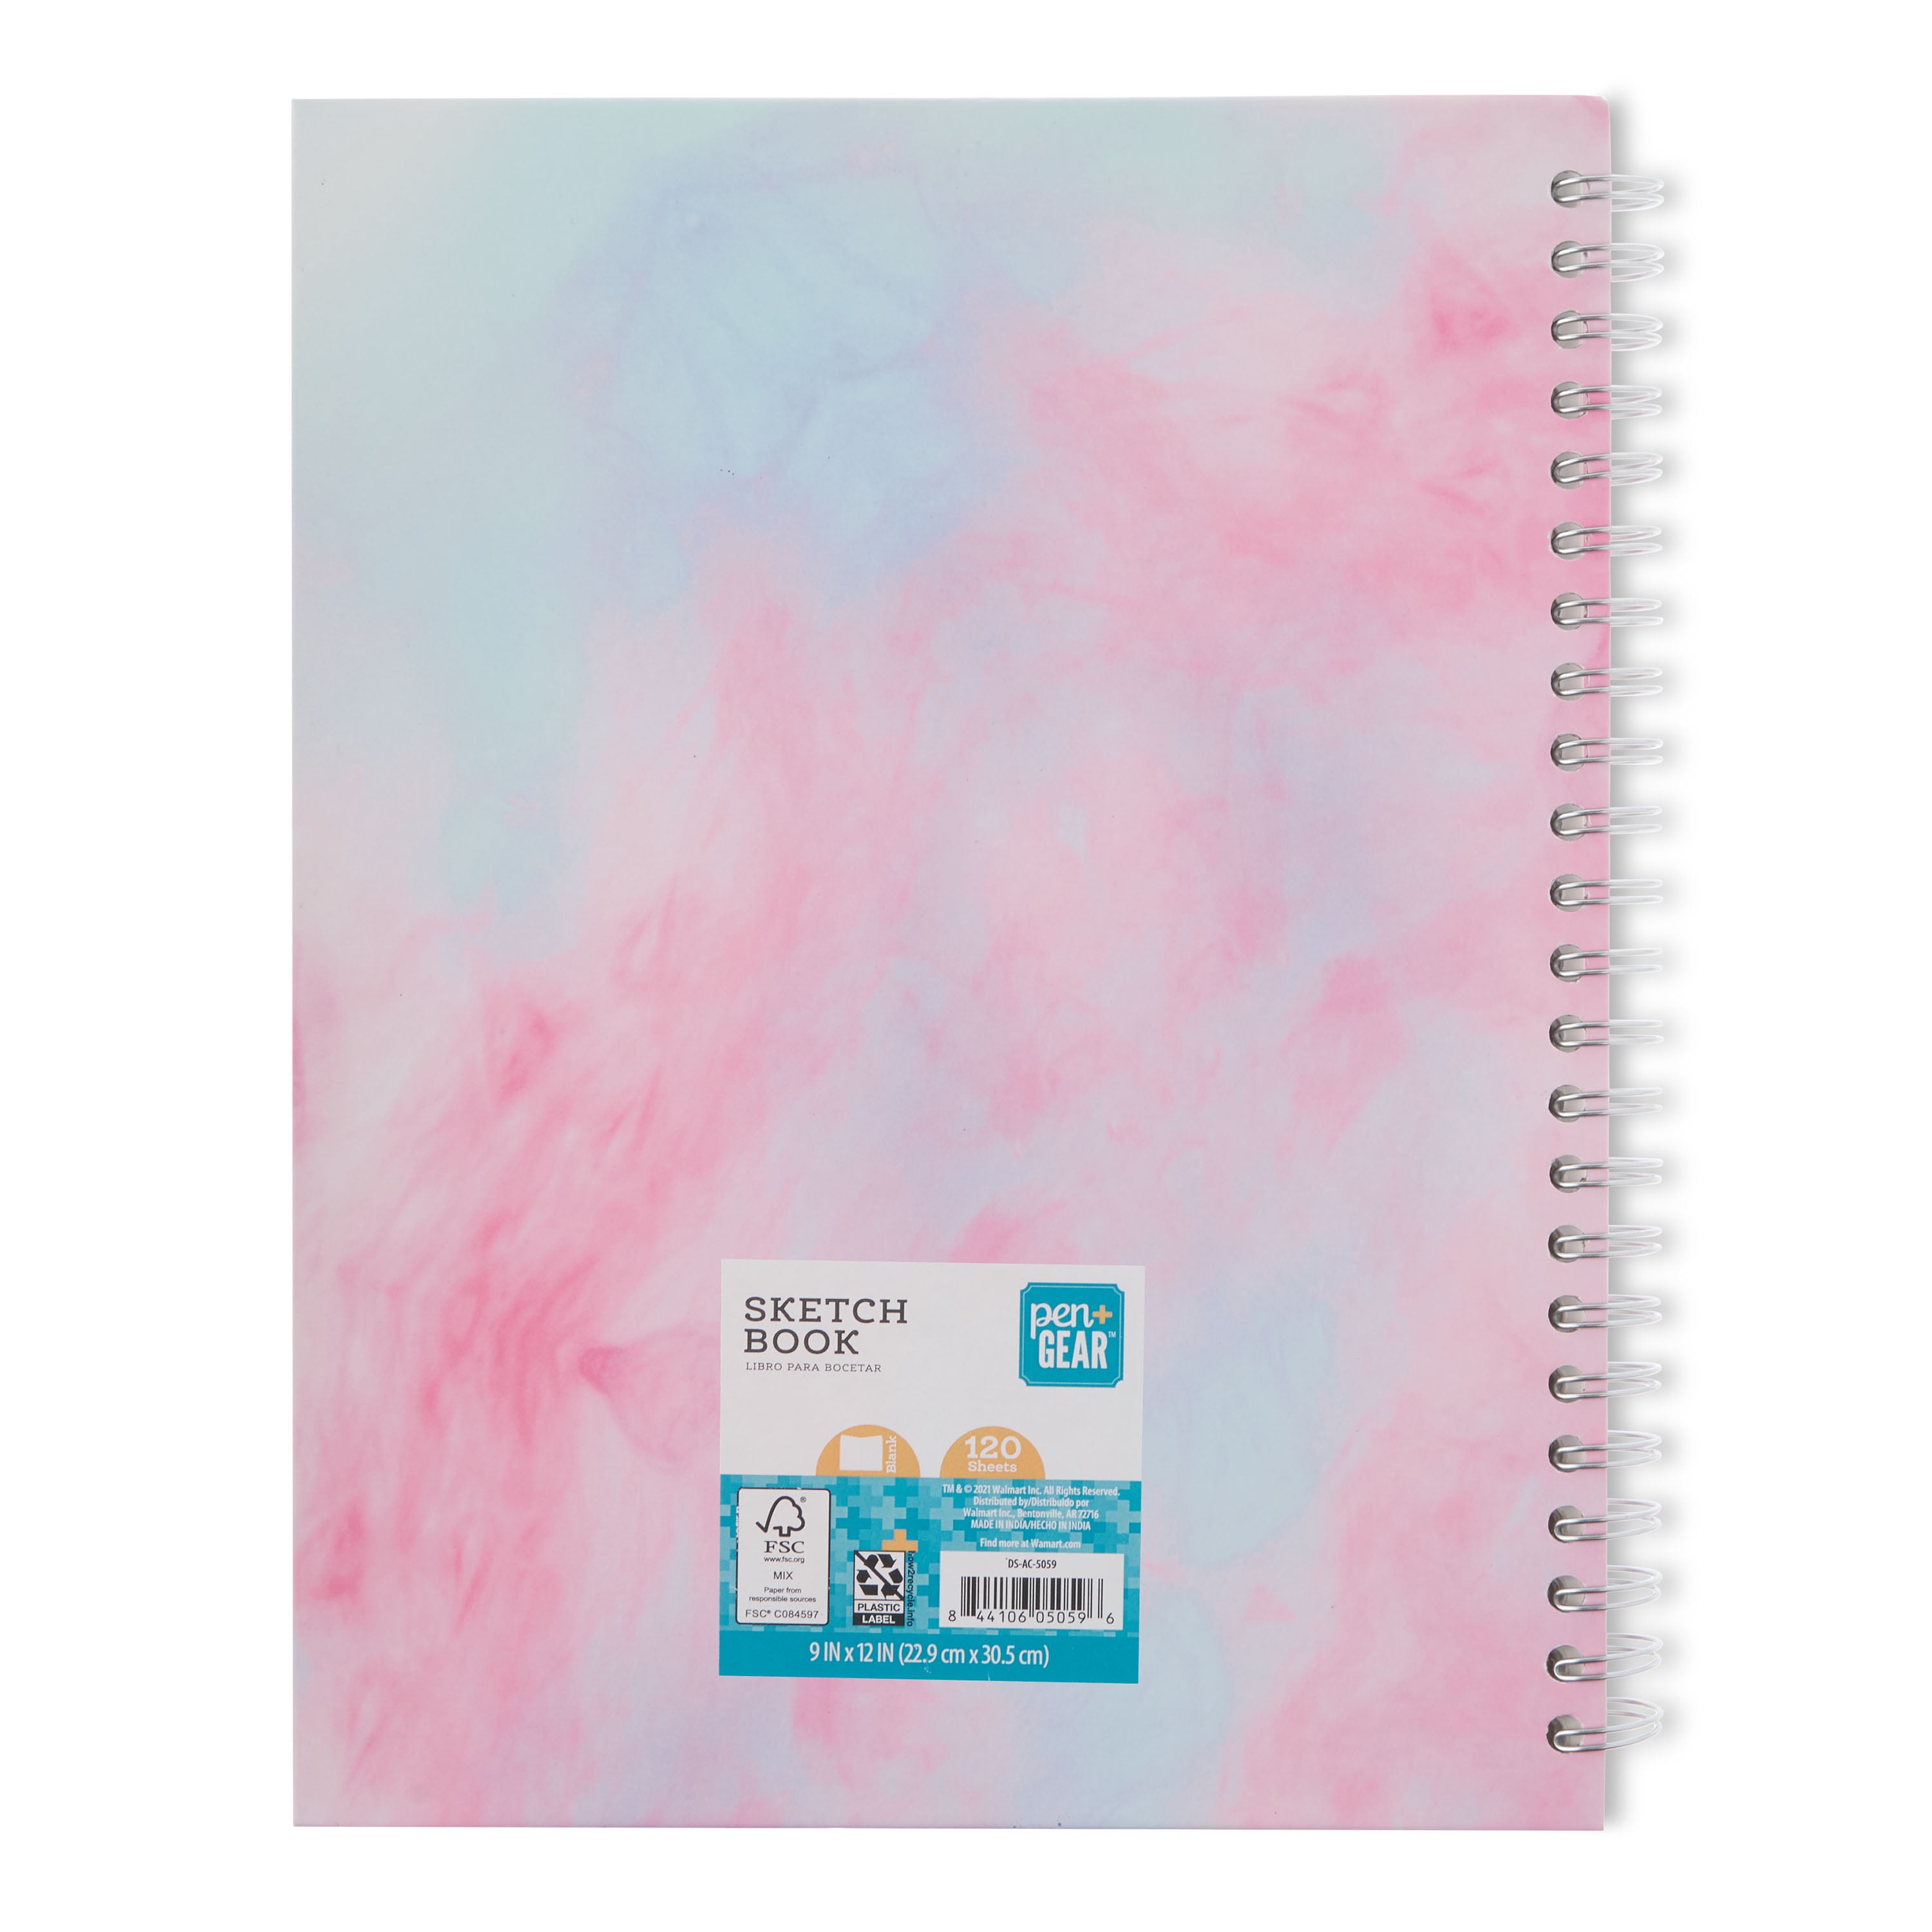 Sketch Book - Girls Only! large 120 Pages Blank Drawing Pad: Sketch Book  for Girls, Paper Drawing and Write Journal, 8.5 x 11 inches, Great  Gift for Children by C.J. Marie